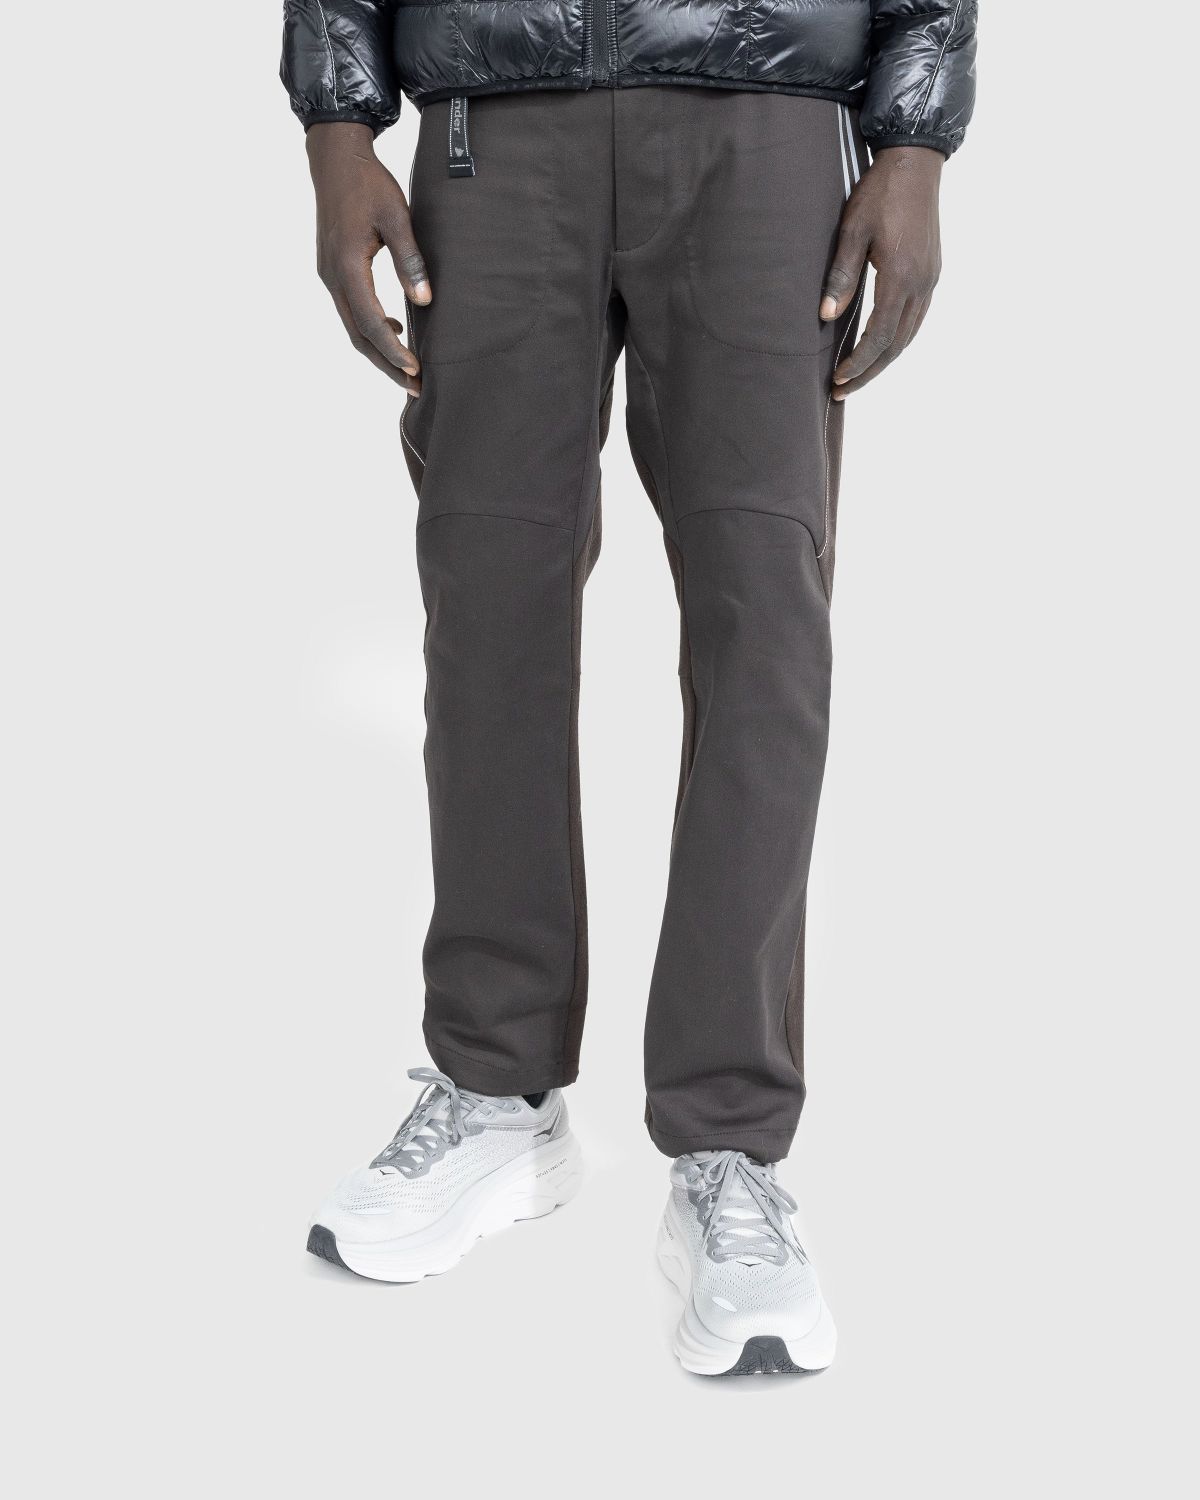 And Wander – Air Hold Pants Brown | Highsnobiety Shop